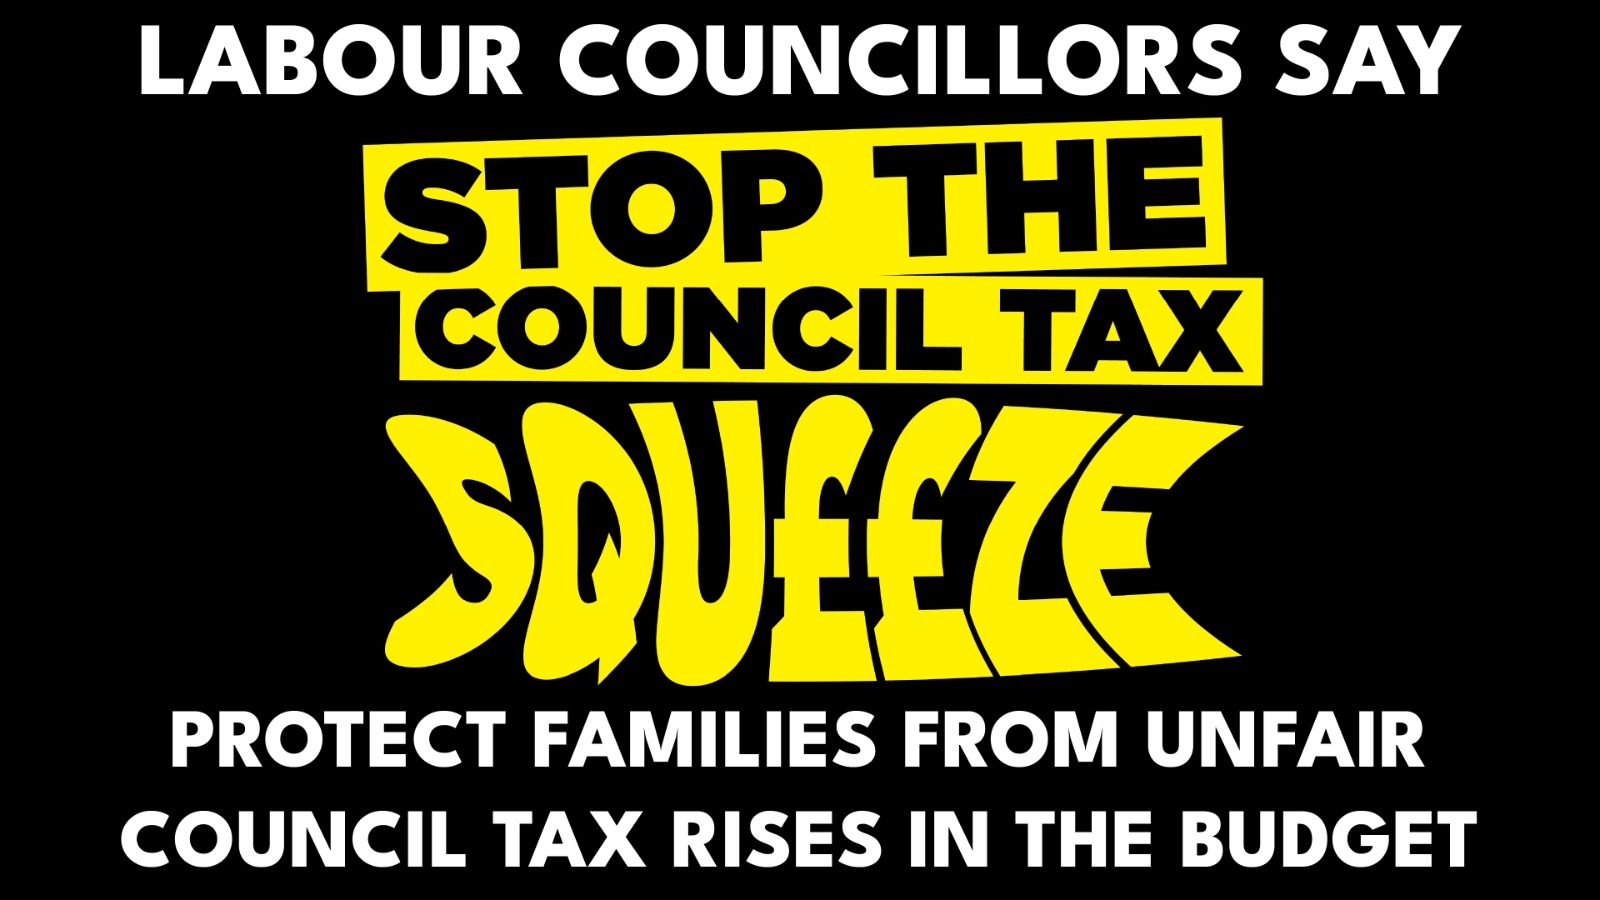 Stop the Council Tax Squeeze